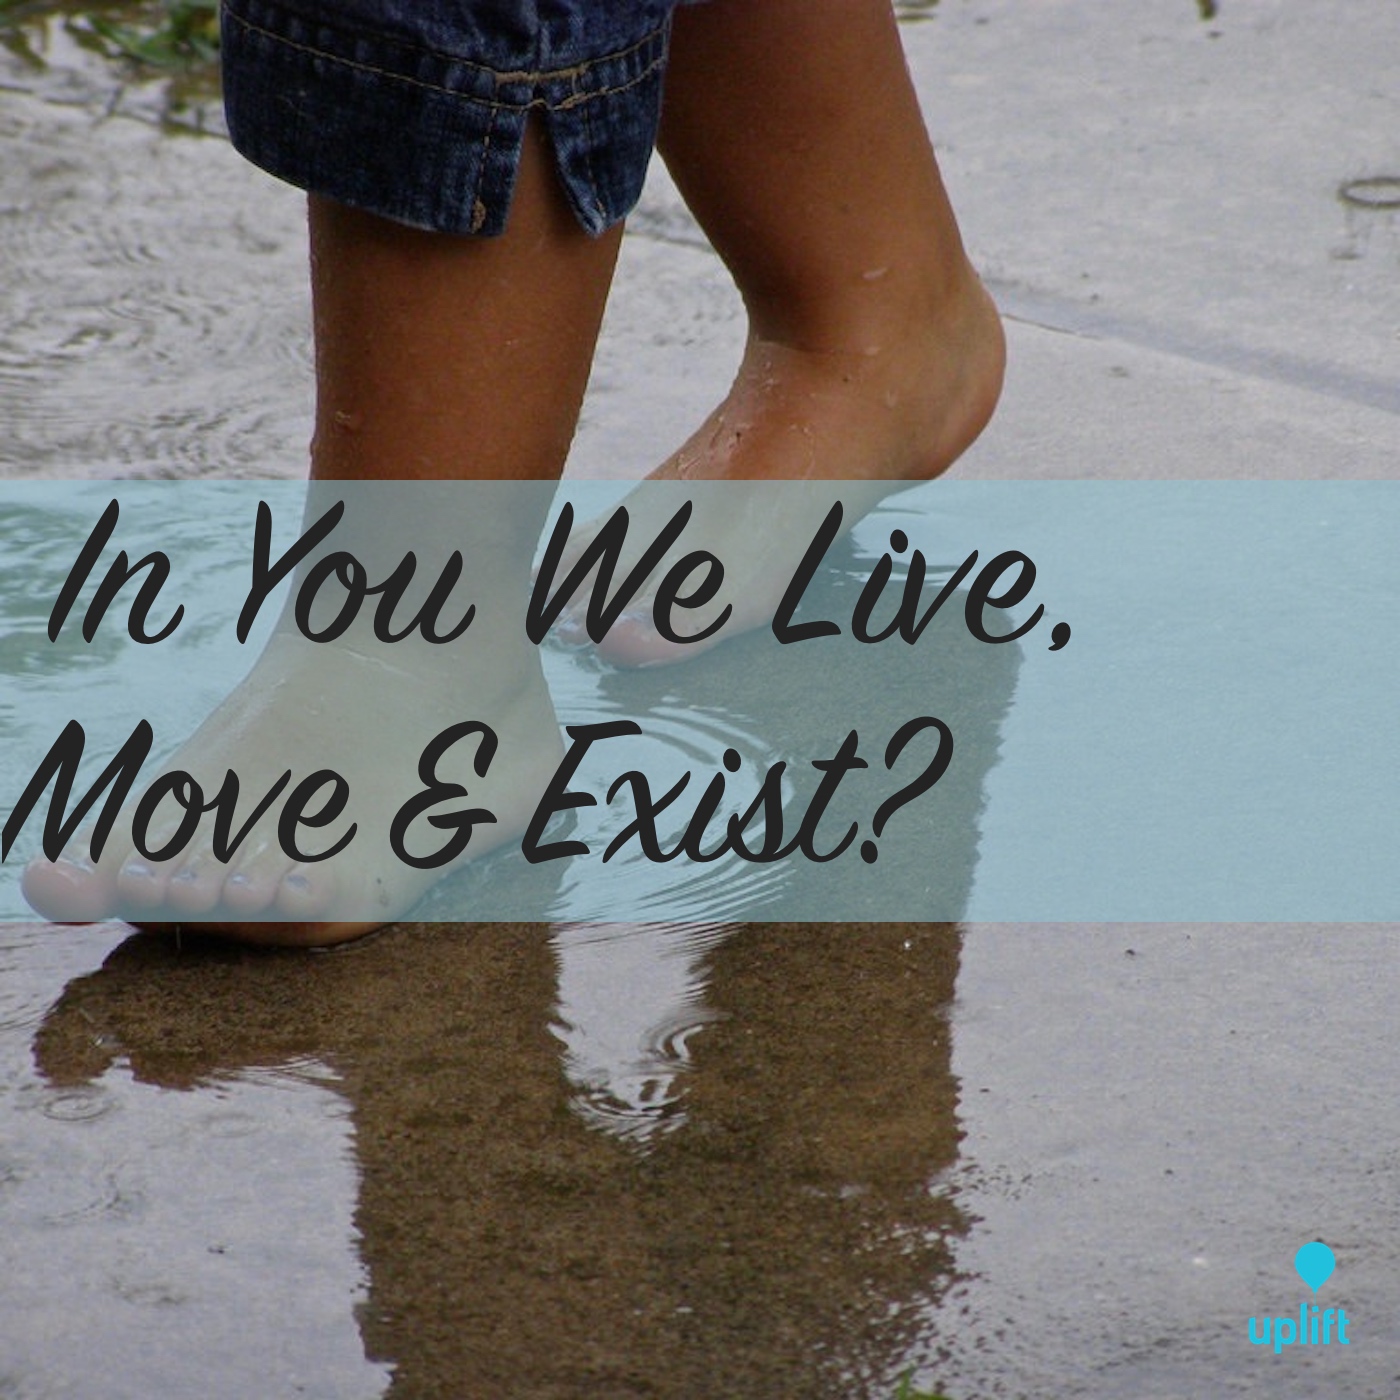 Episode 10: In You We Live, Move & Exist?